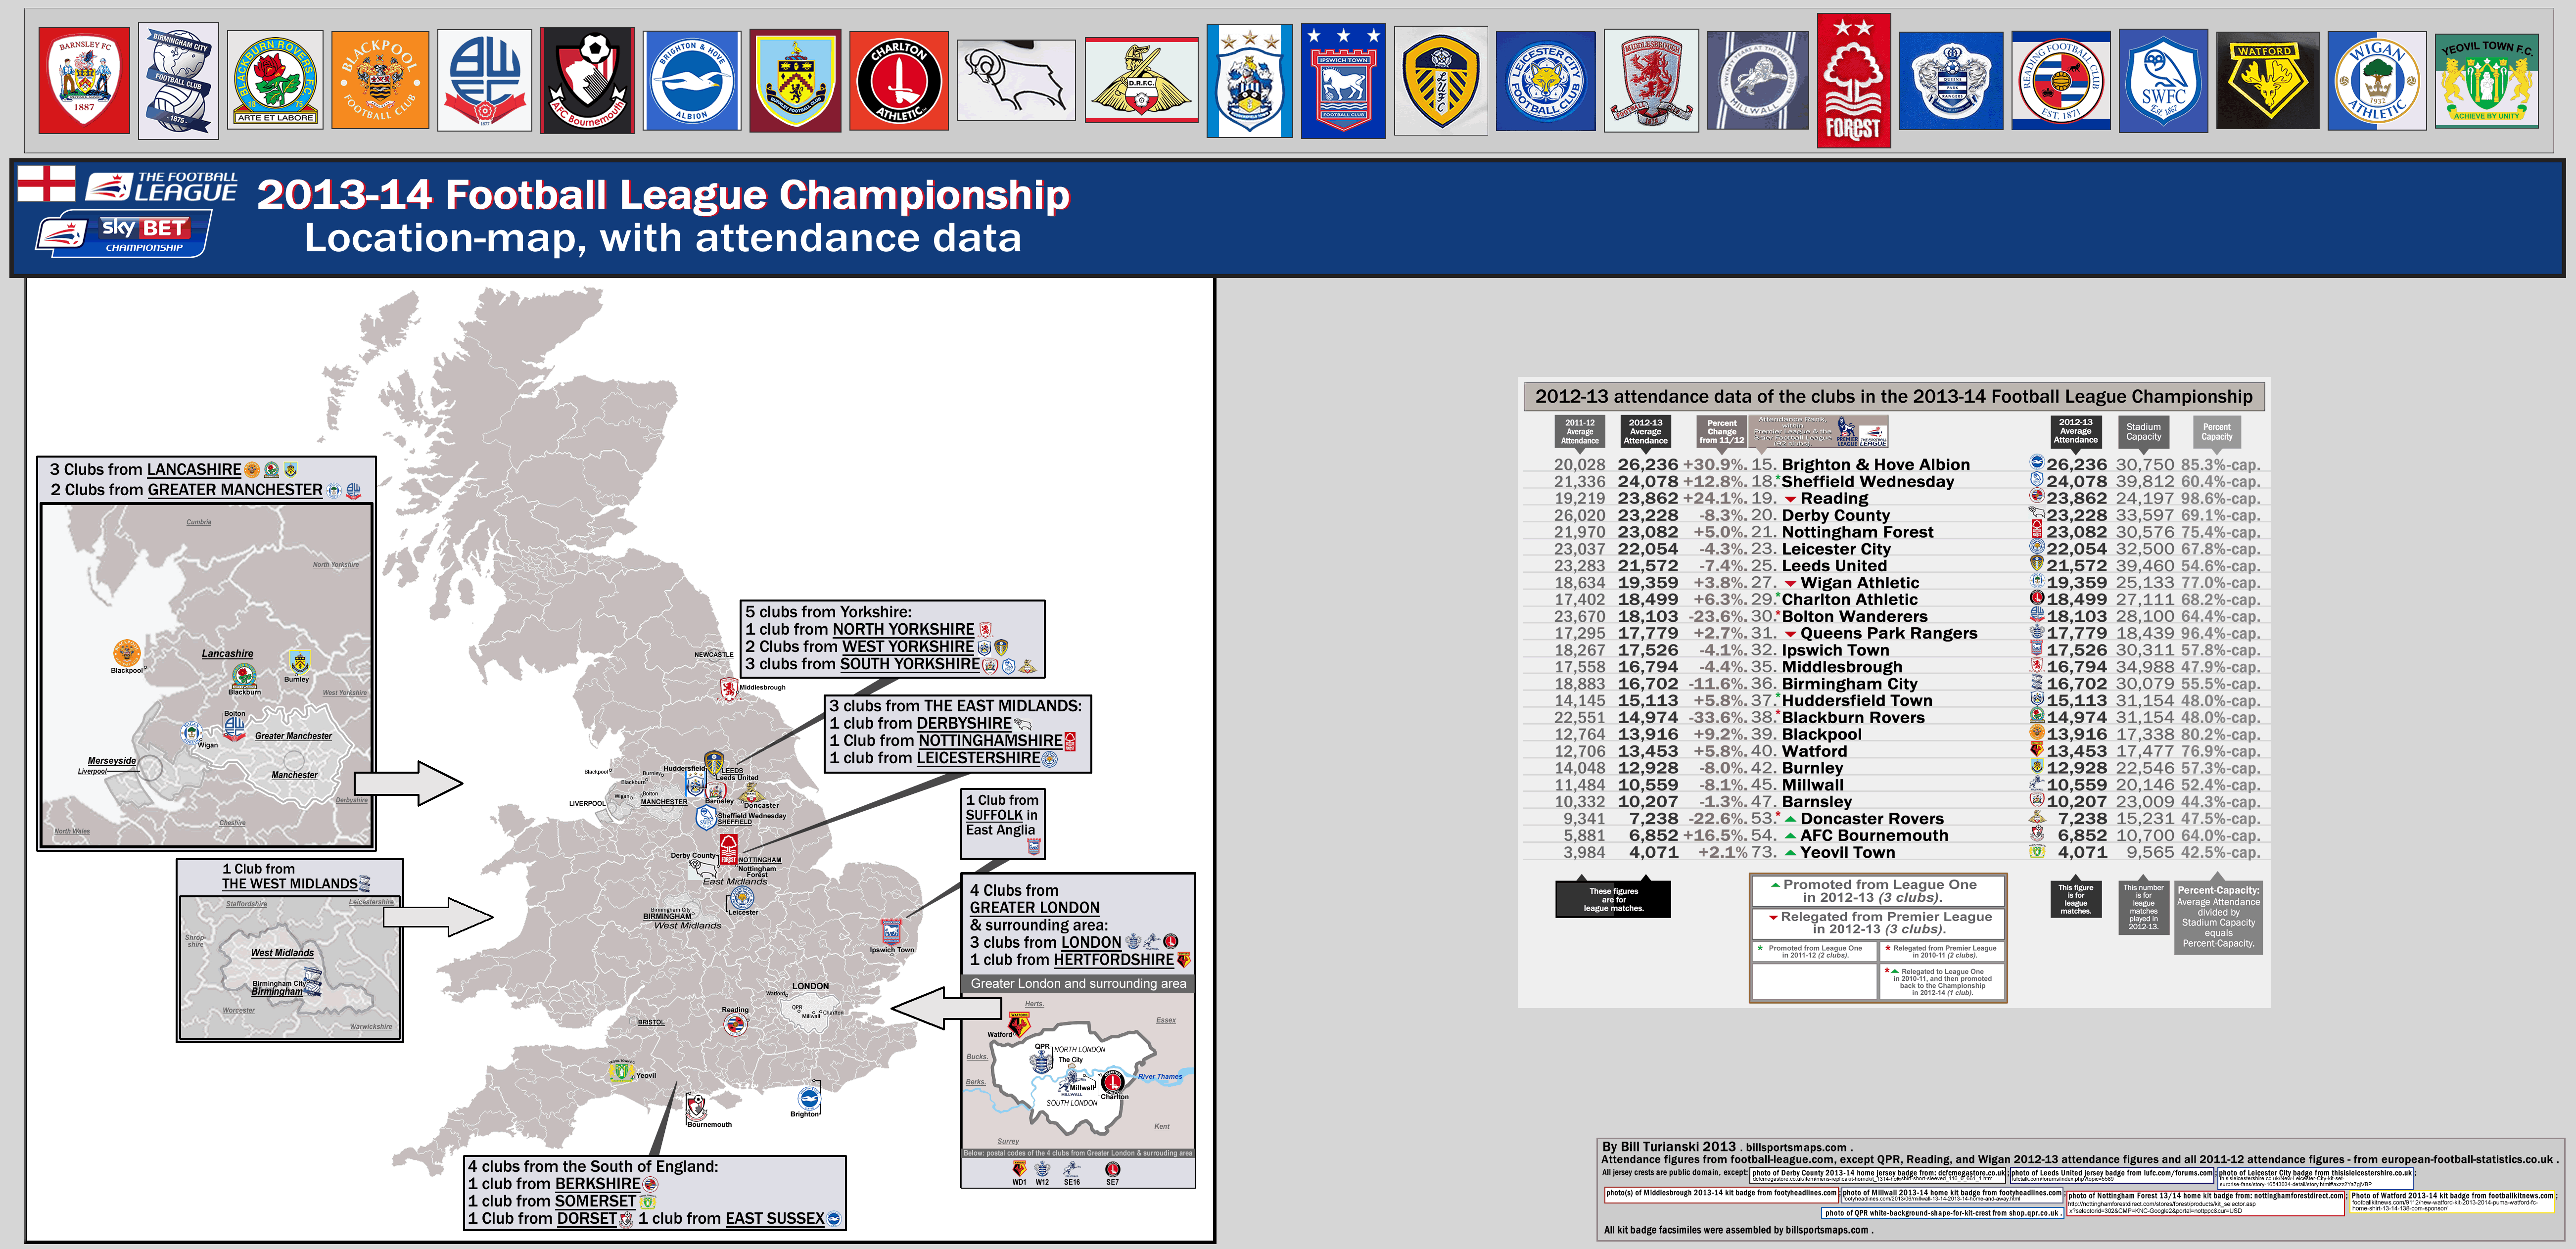 England: League Championship – 2012-13 Location-map, with